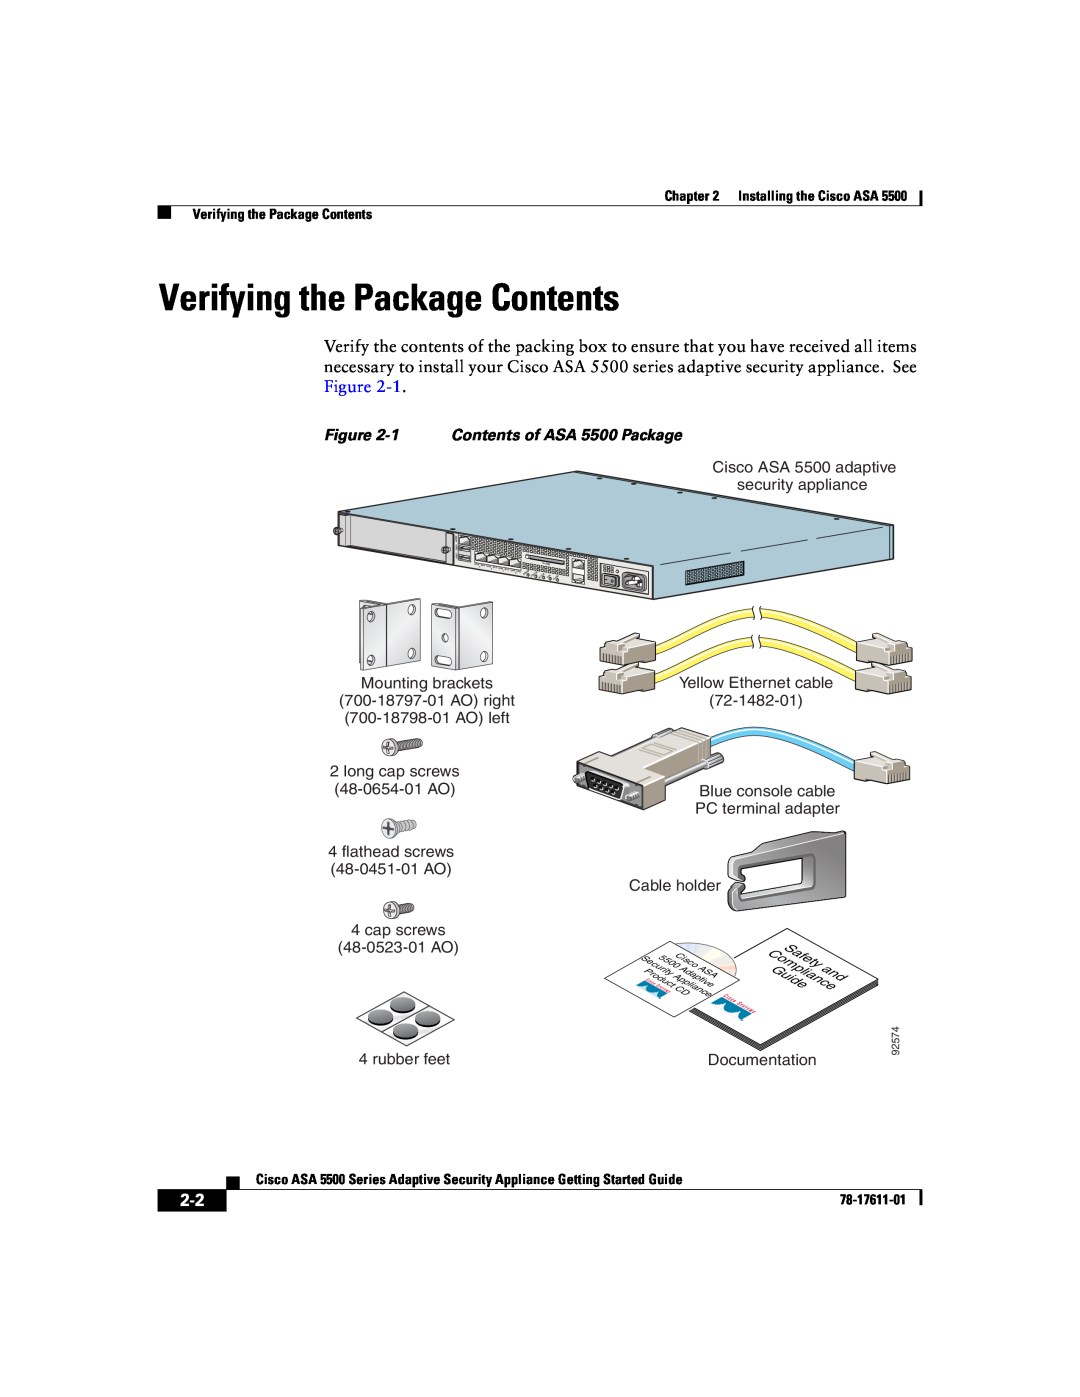 Cisco Systems manual Verifying the Package Contents, 1Contents of ASA 5500 Package 